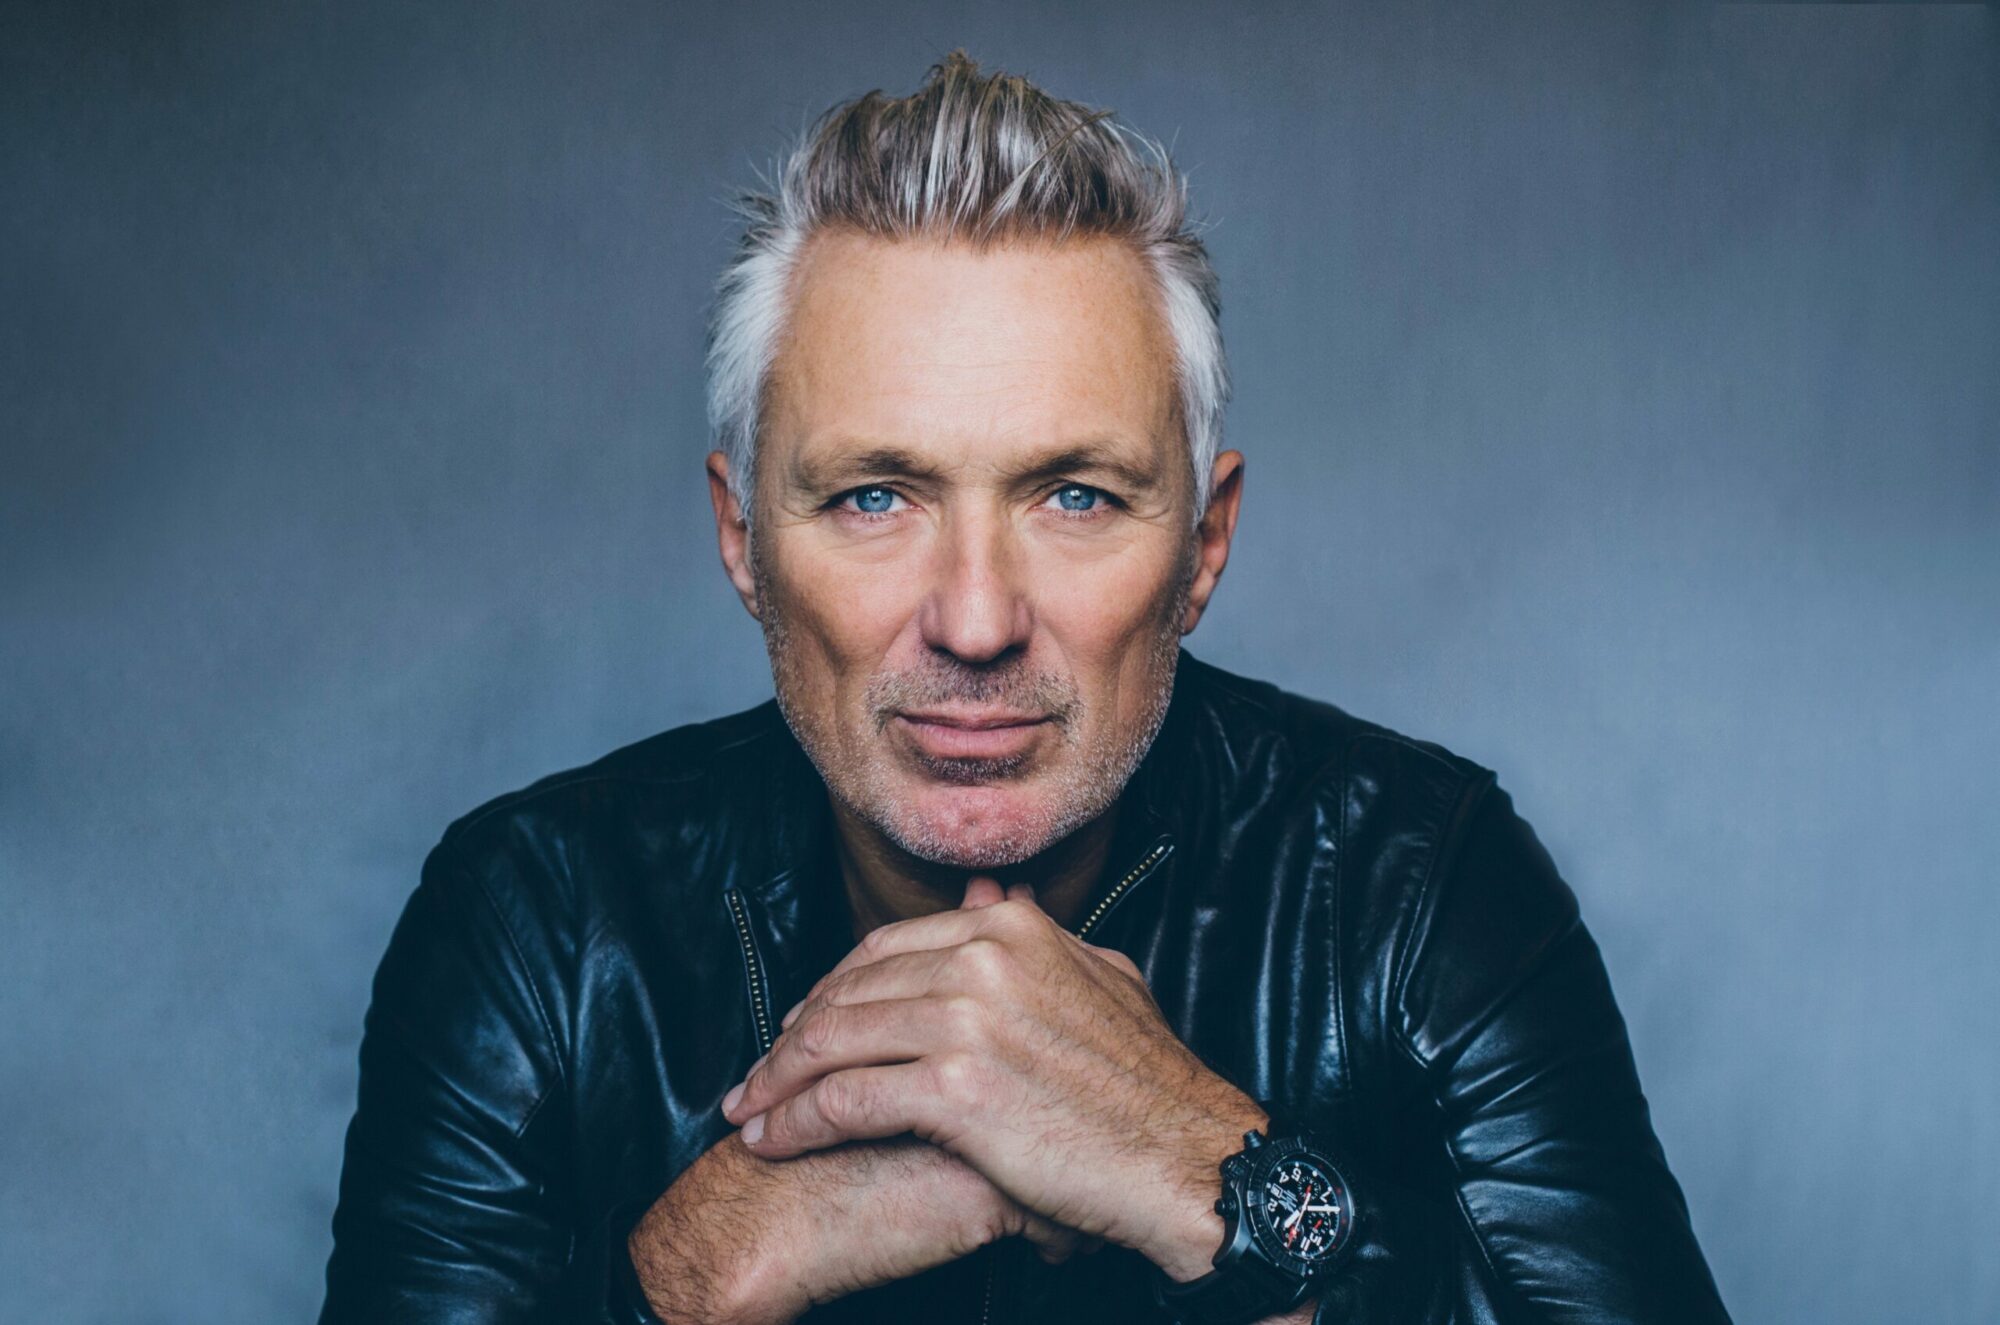 Image name Martin Kemp Back to the 80s at York Barbican York scaled the 1 image from the post Martin Kemp Ultimate Back to The 80s DJ Set at O2 Academy Leeds, Leeds in Yorkshire.com.